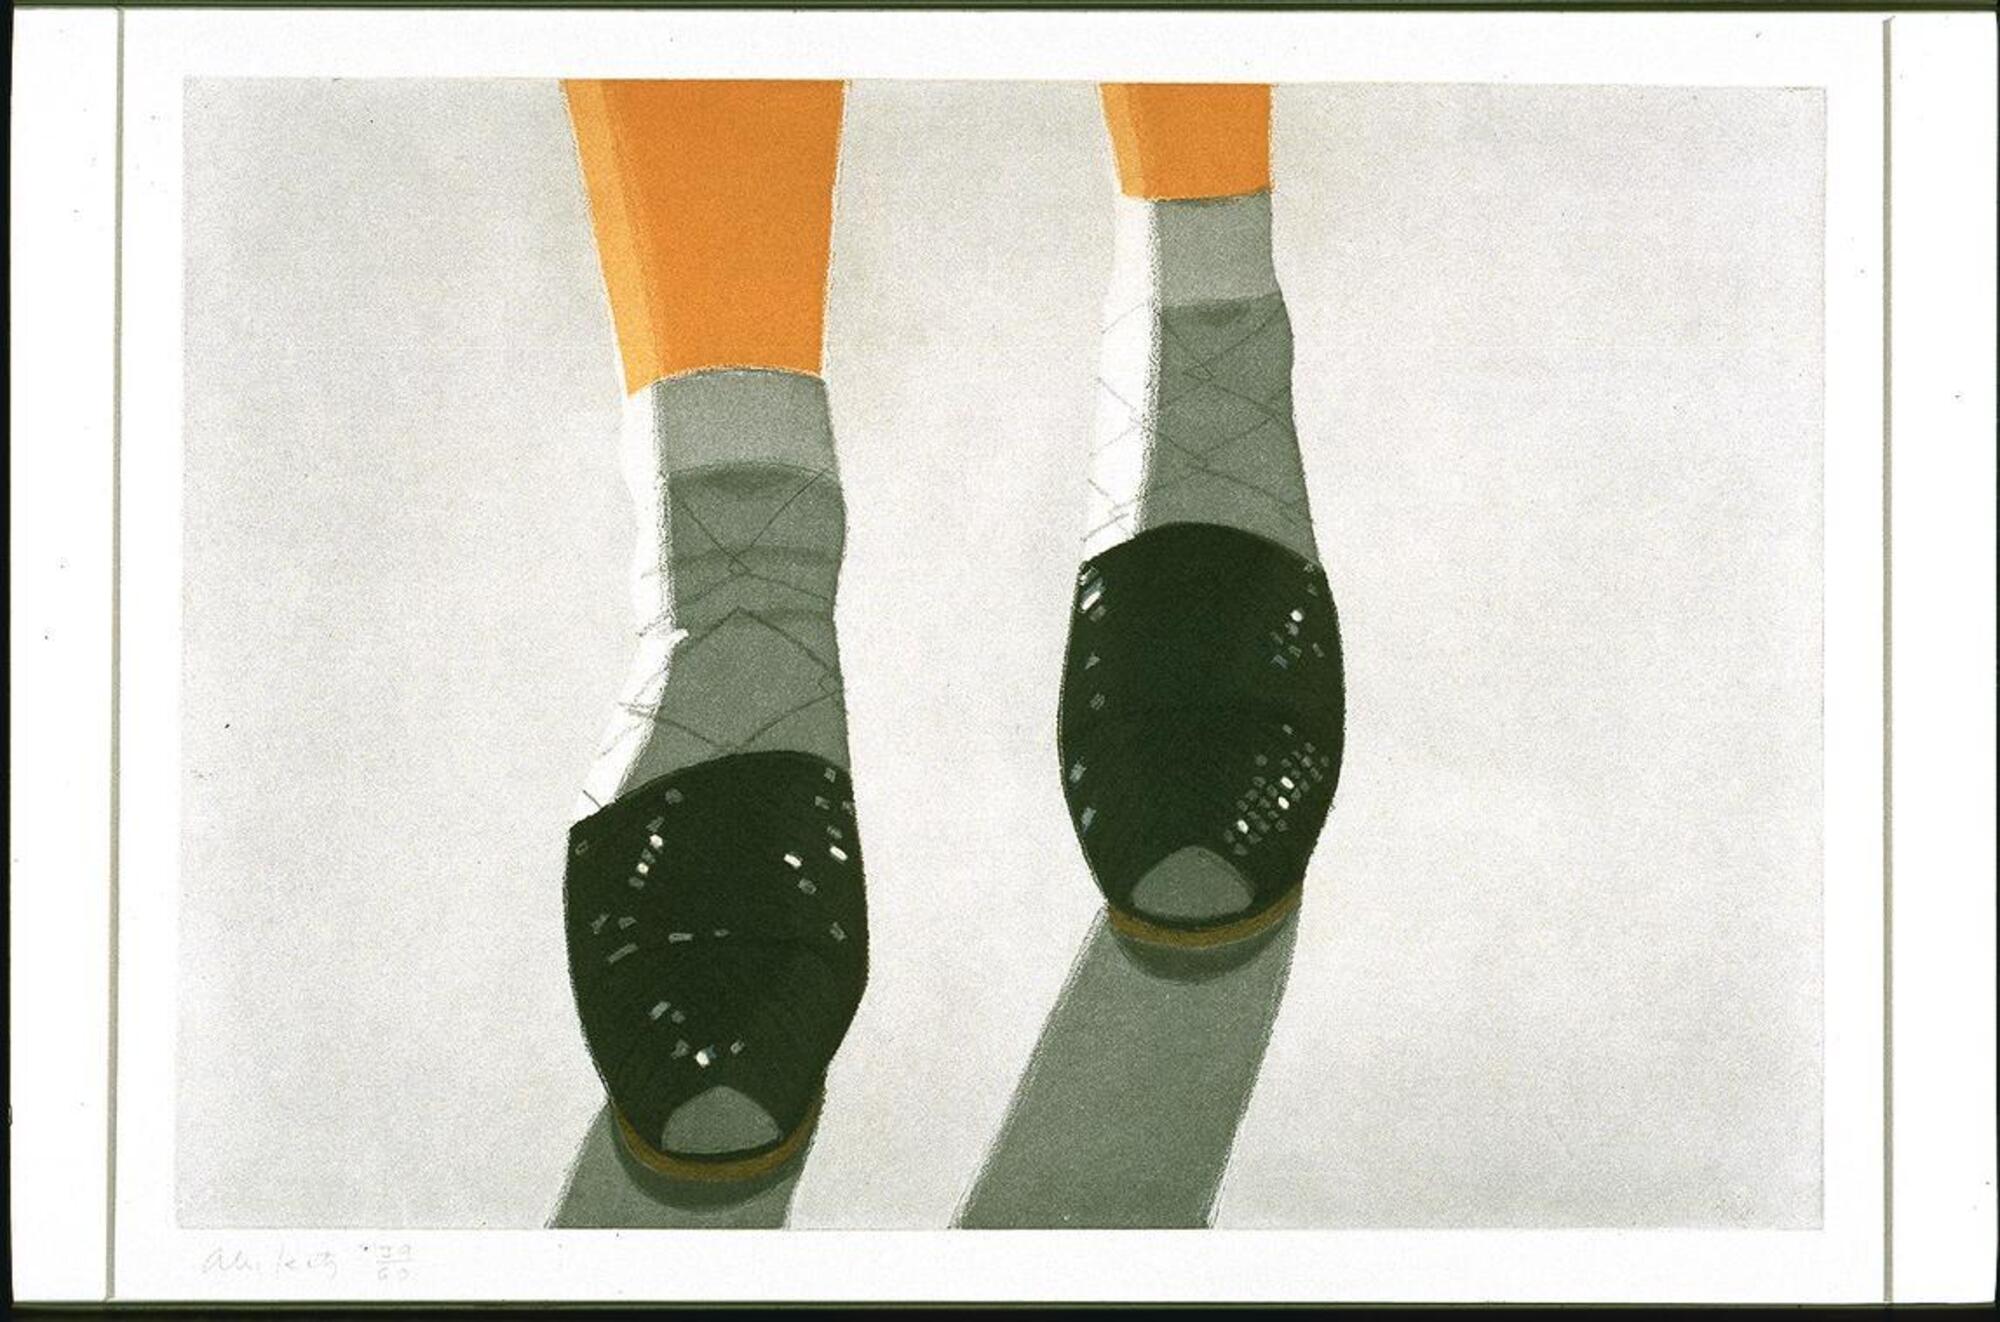 This horizontal print shows two feet walking toward the viewer seen from just above the ankle. The person wears grey socks and black shoes. The image has a plain grey background.